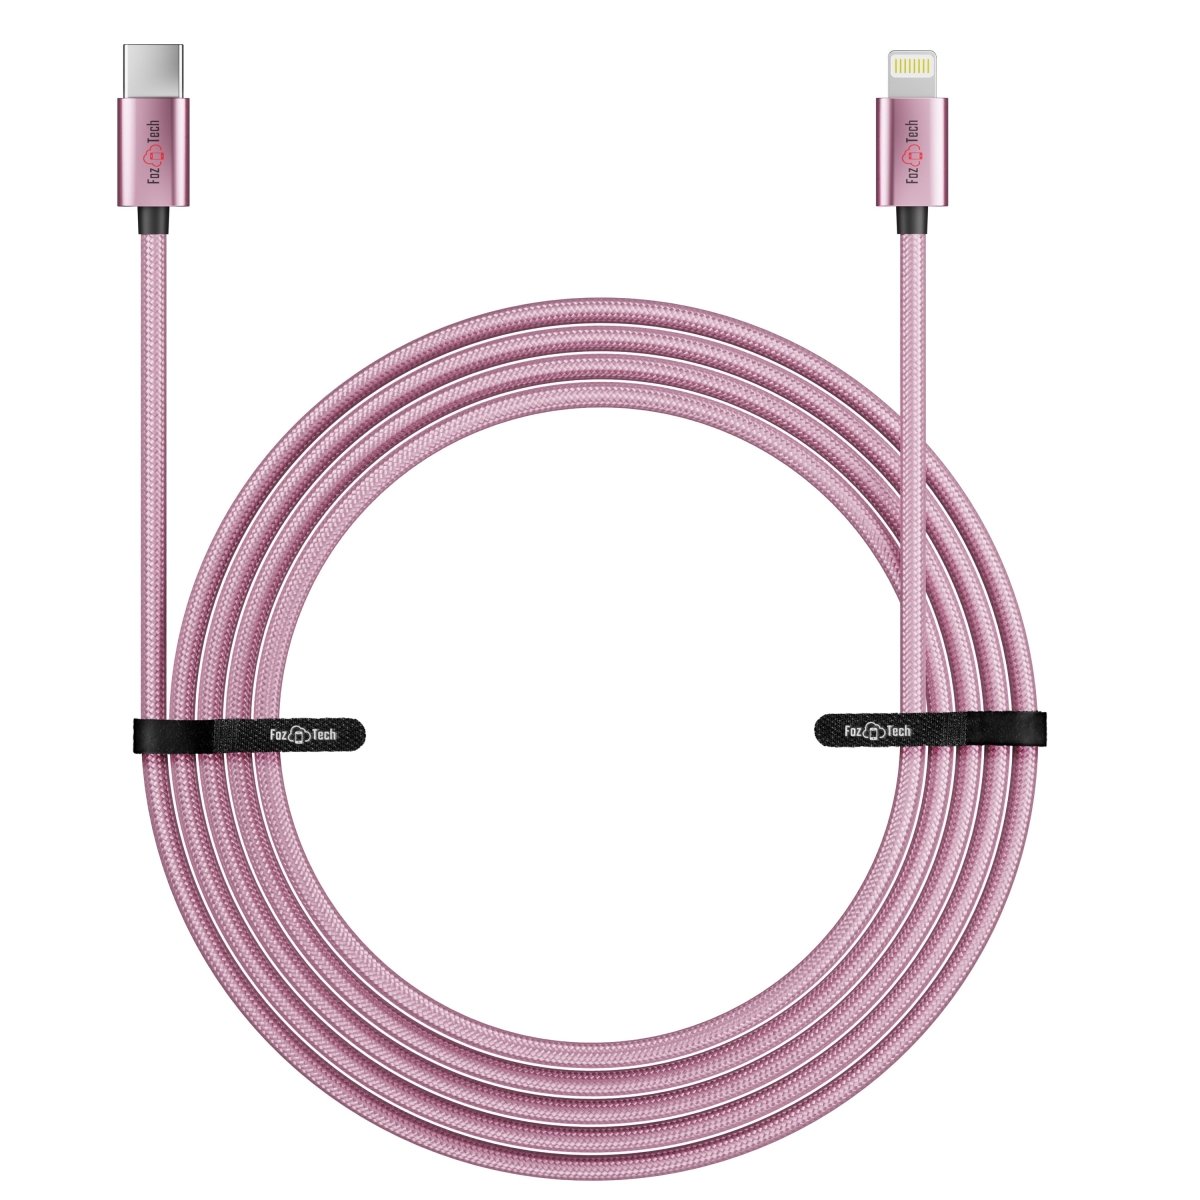 FozTech - CORE Series - USB-C Fast Charger Cable for iPhone 14 13 12 11 XR XS SE X 8 - Rose Gold - USB Cable - FozTech Official Store